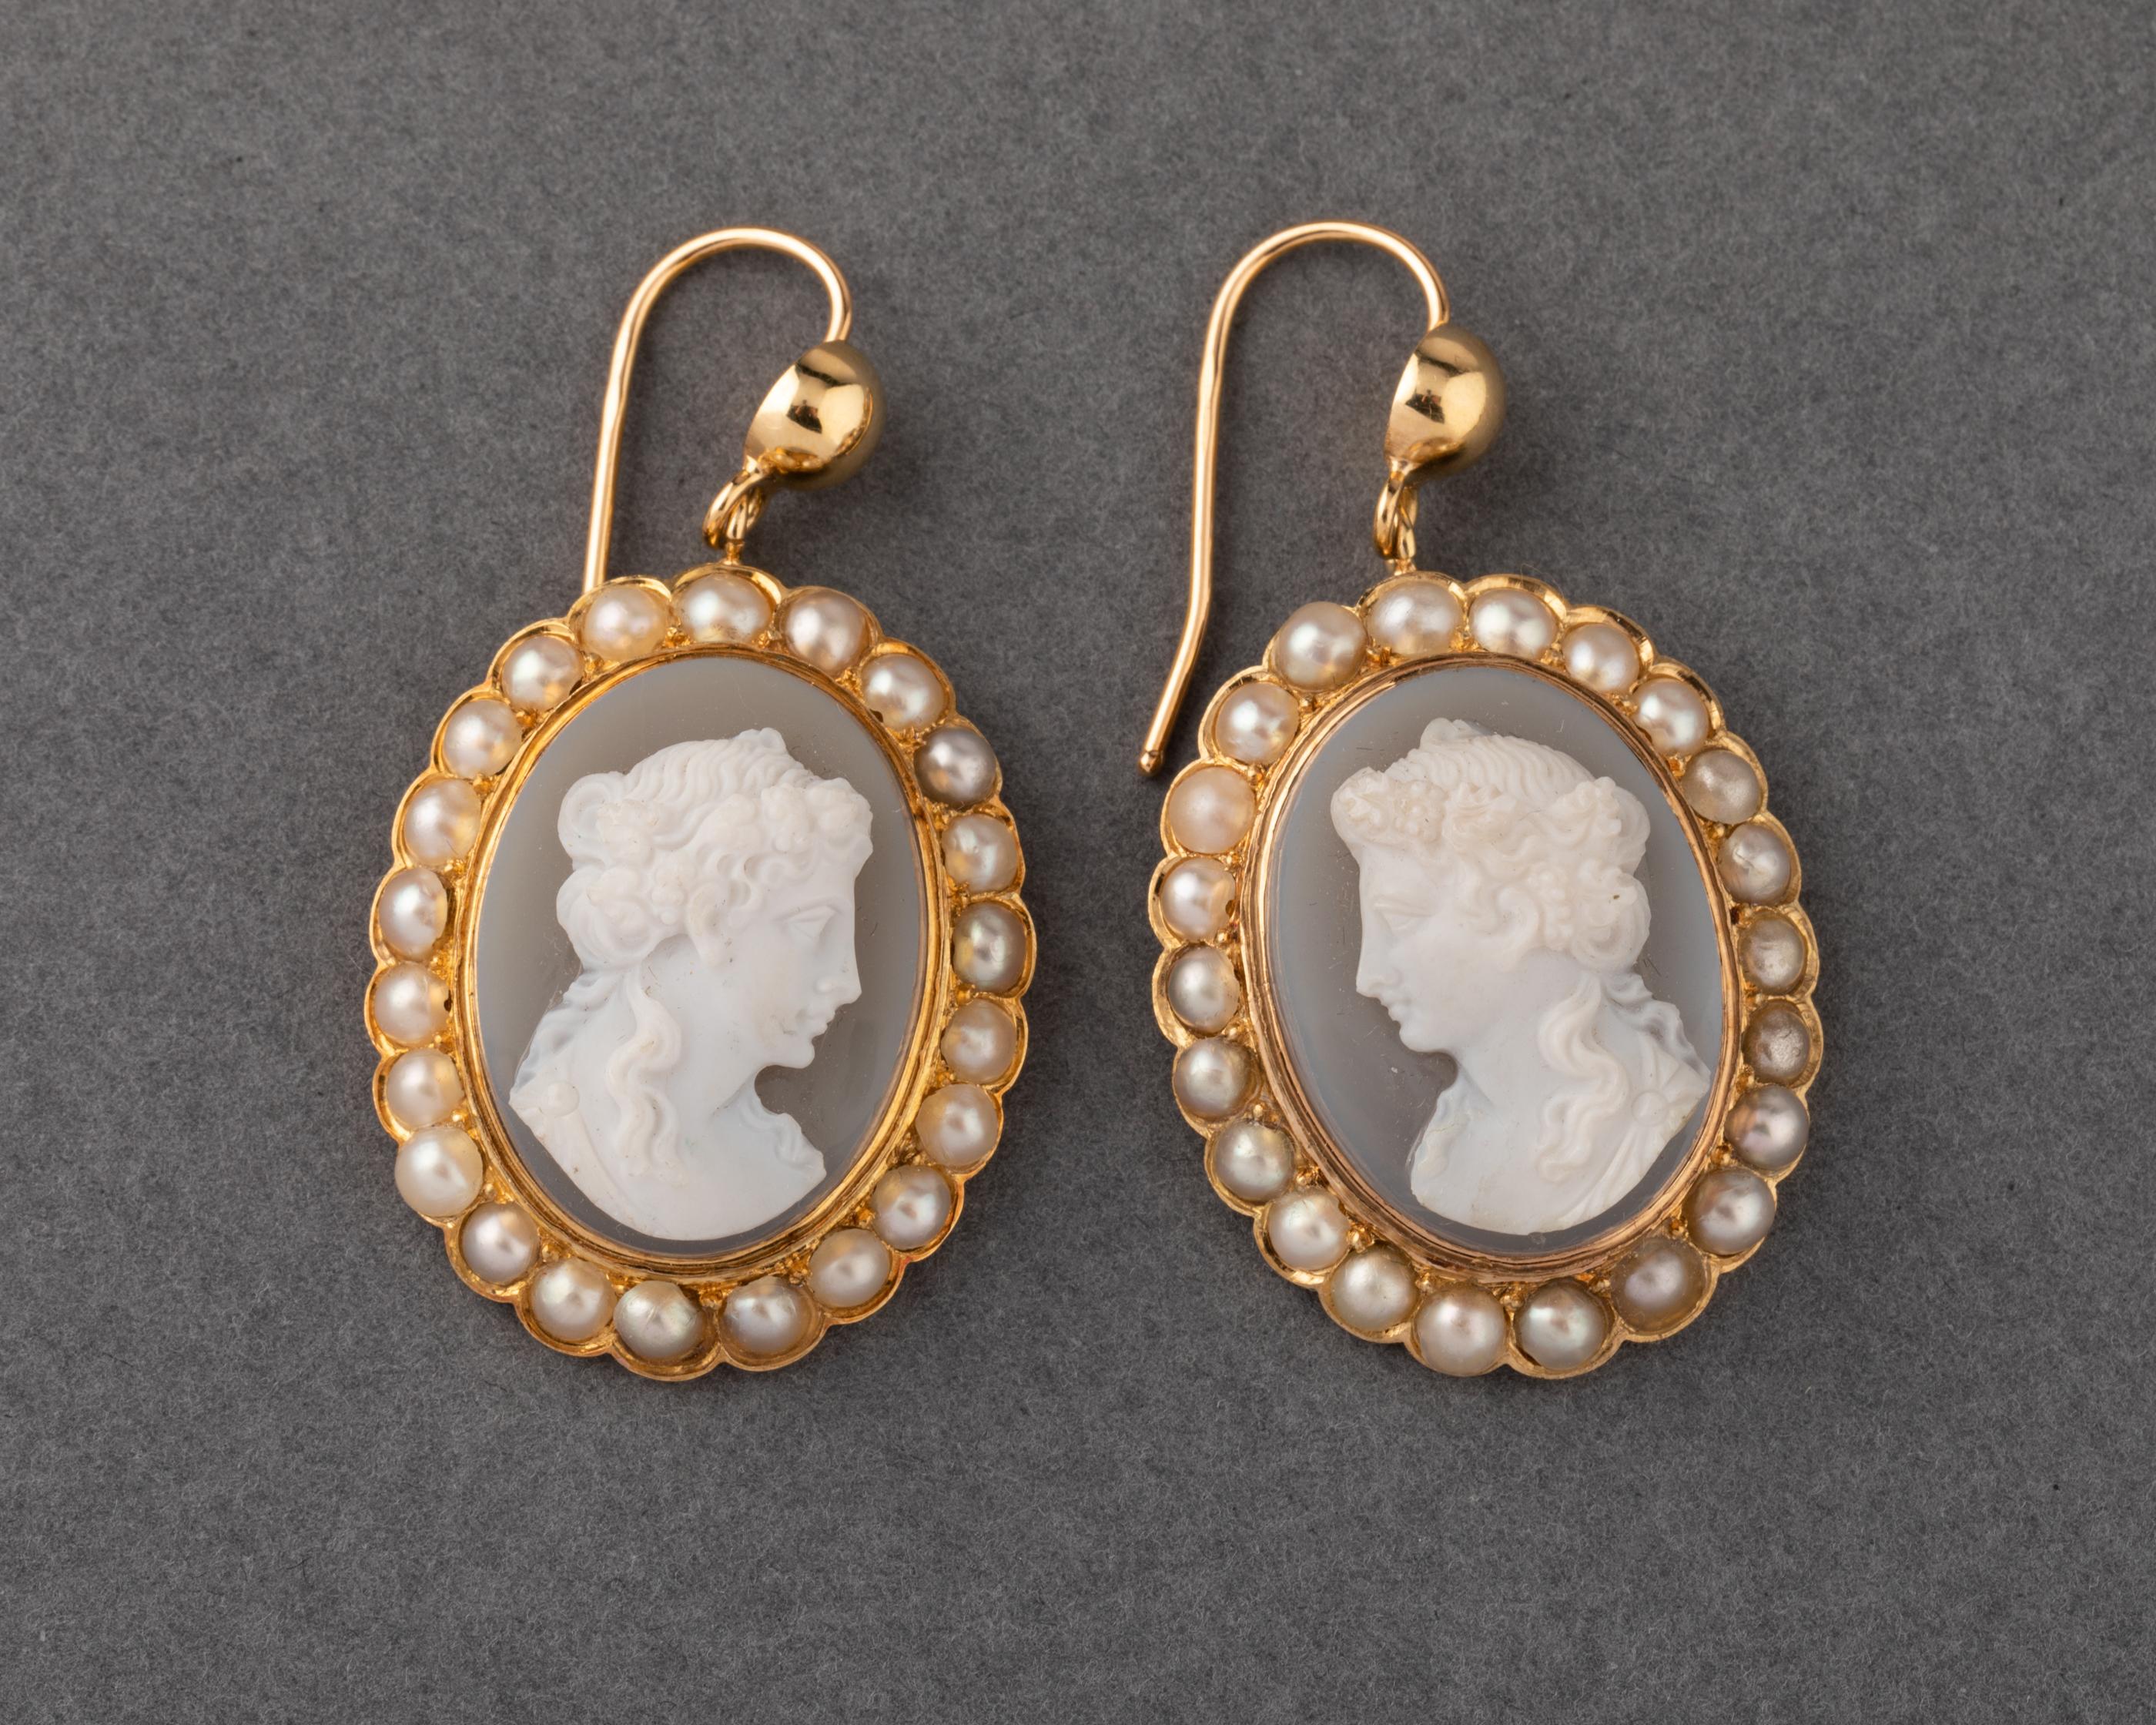 cameo earrings antique